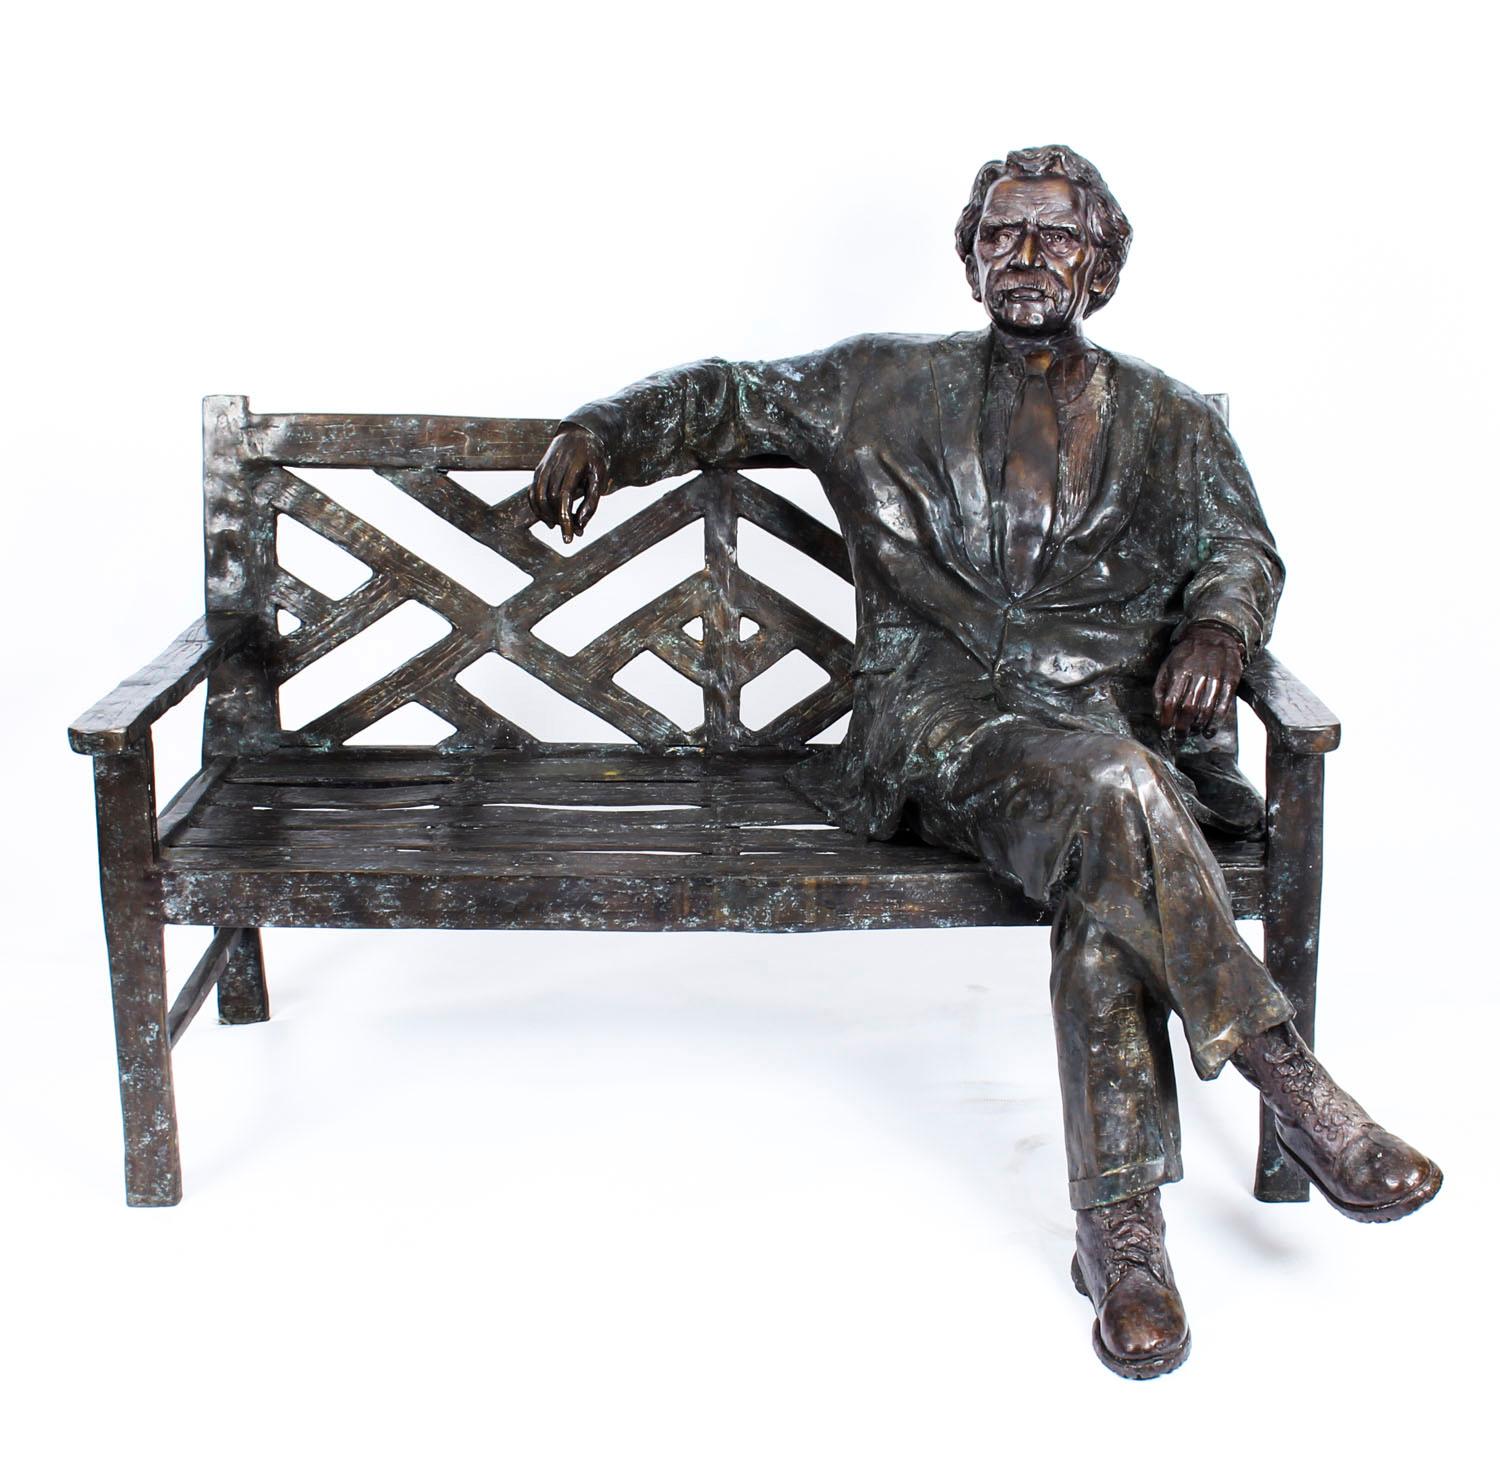 This is a spectacular larger than life-size vintage bronze statue of the German-born theoretical physicist, Albert Einstein, sitting in a relaxed and informal way on an outdoor bench and dating from the late 20th century.

This remarkable statue is